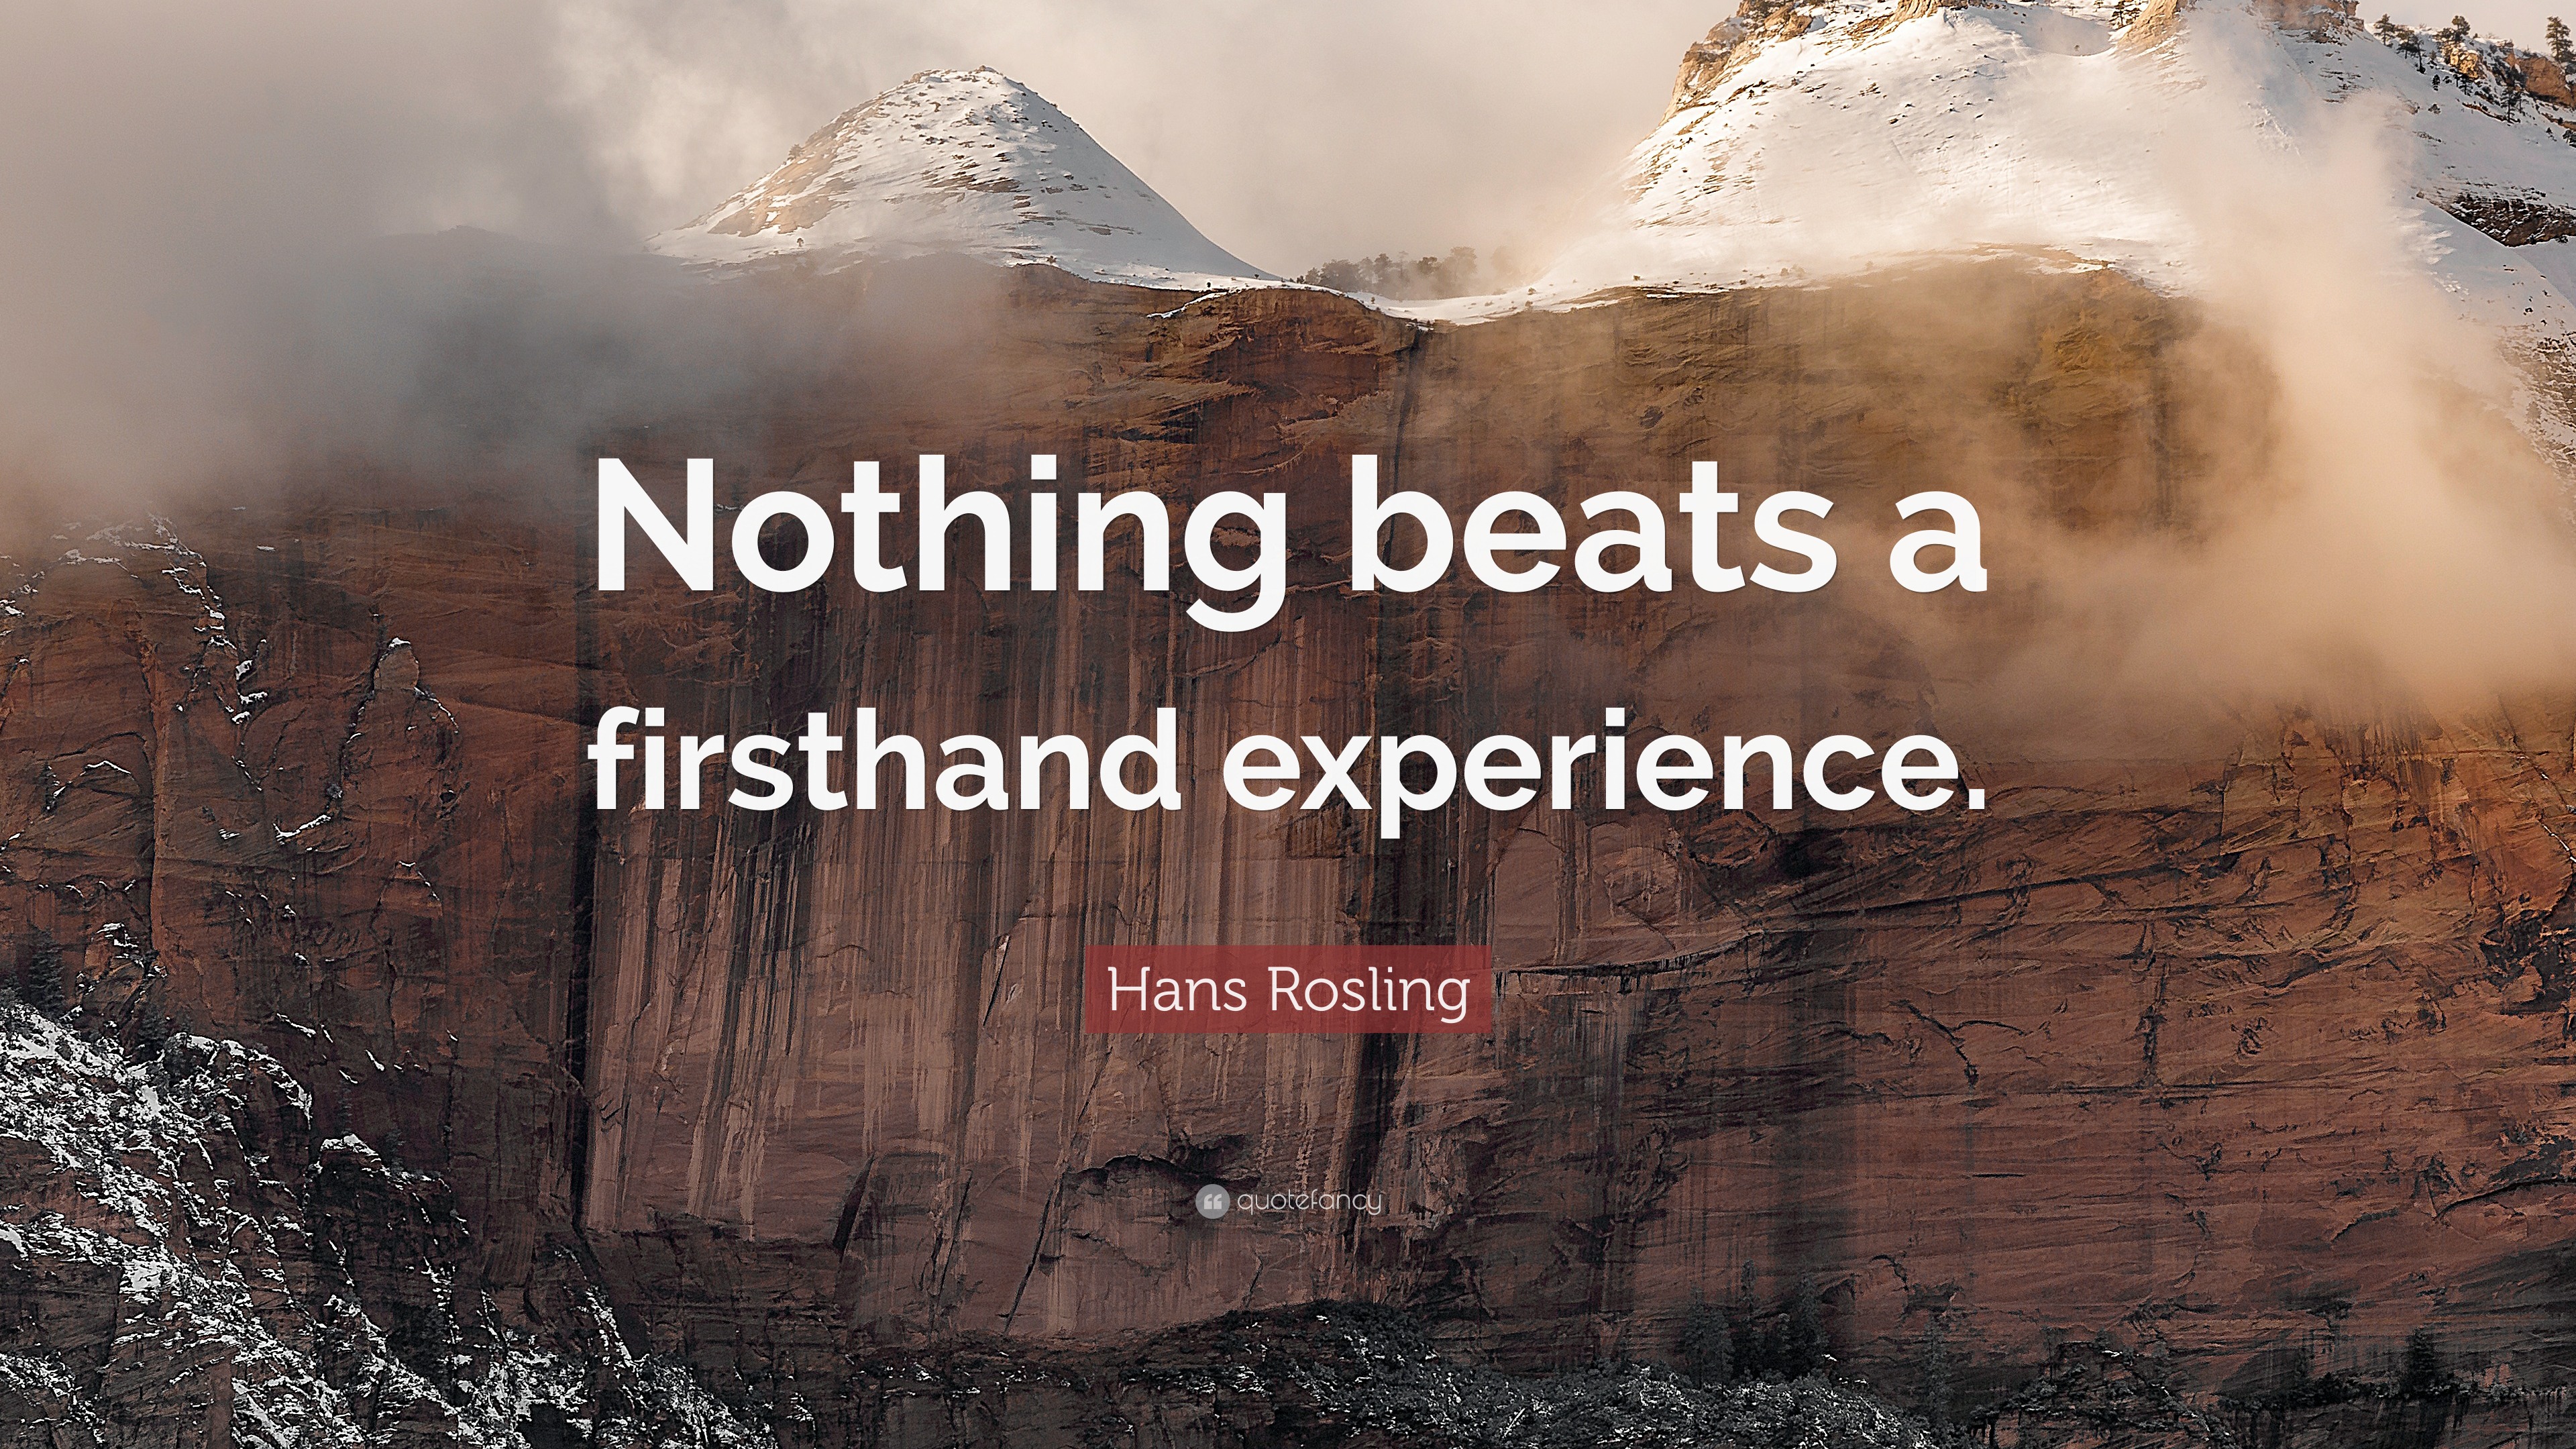 Experience it firsthand